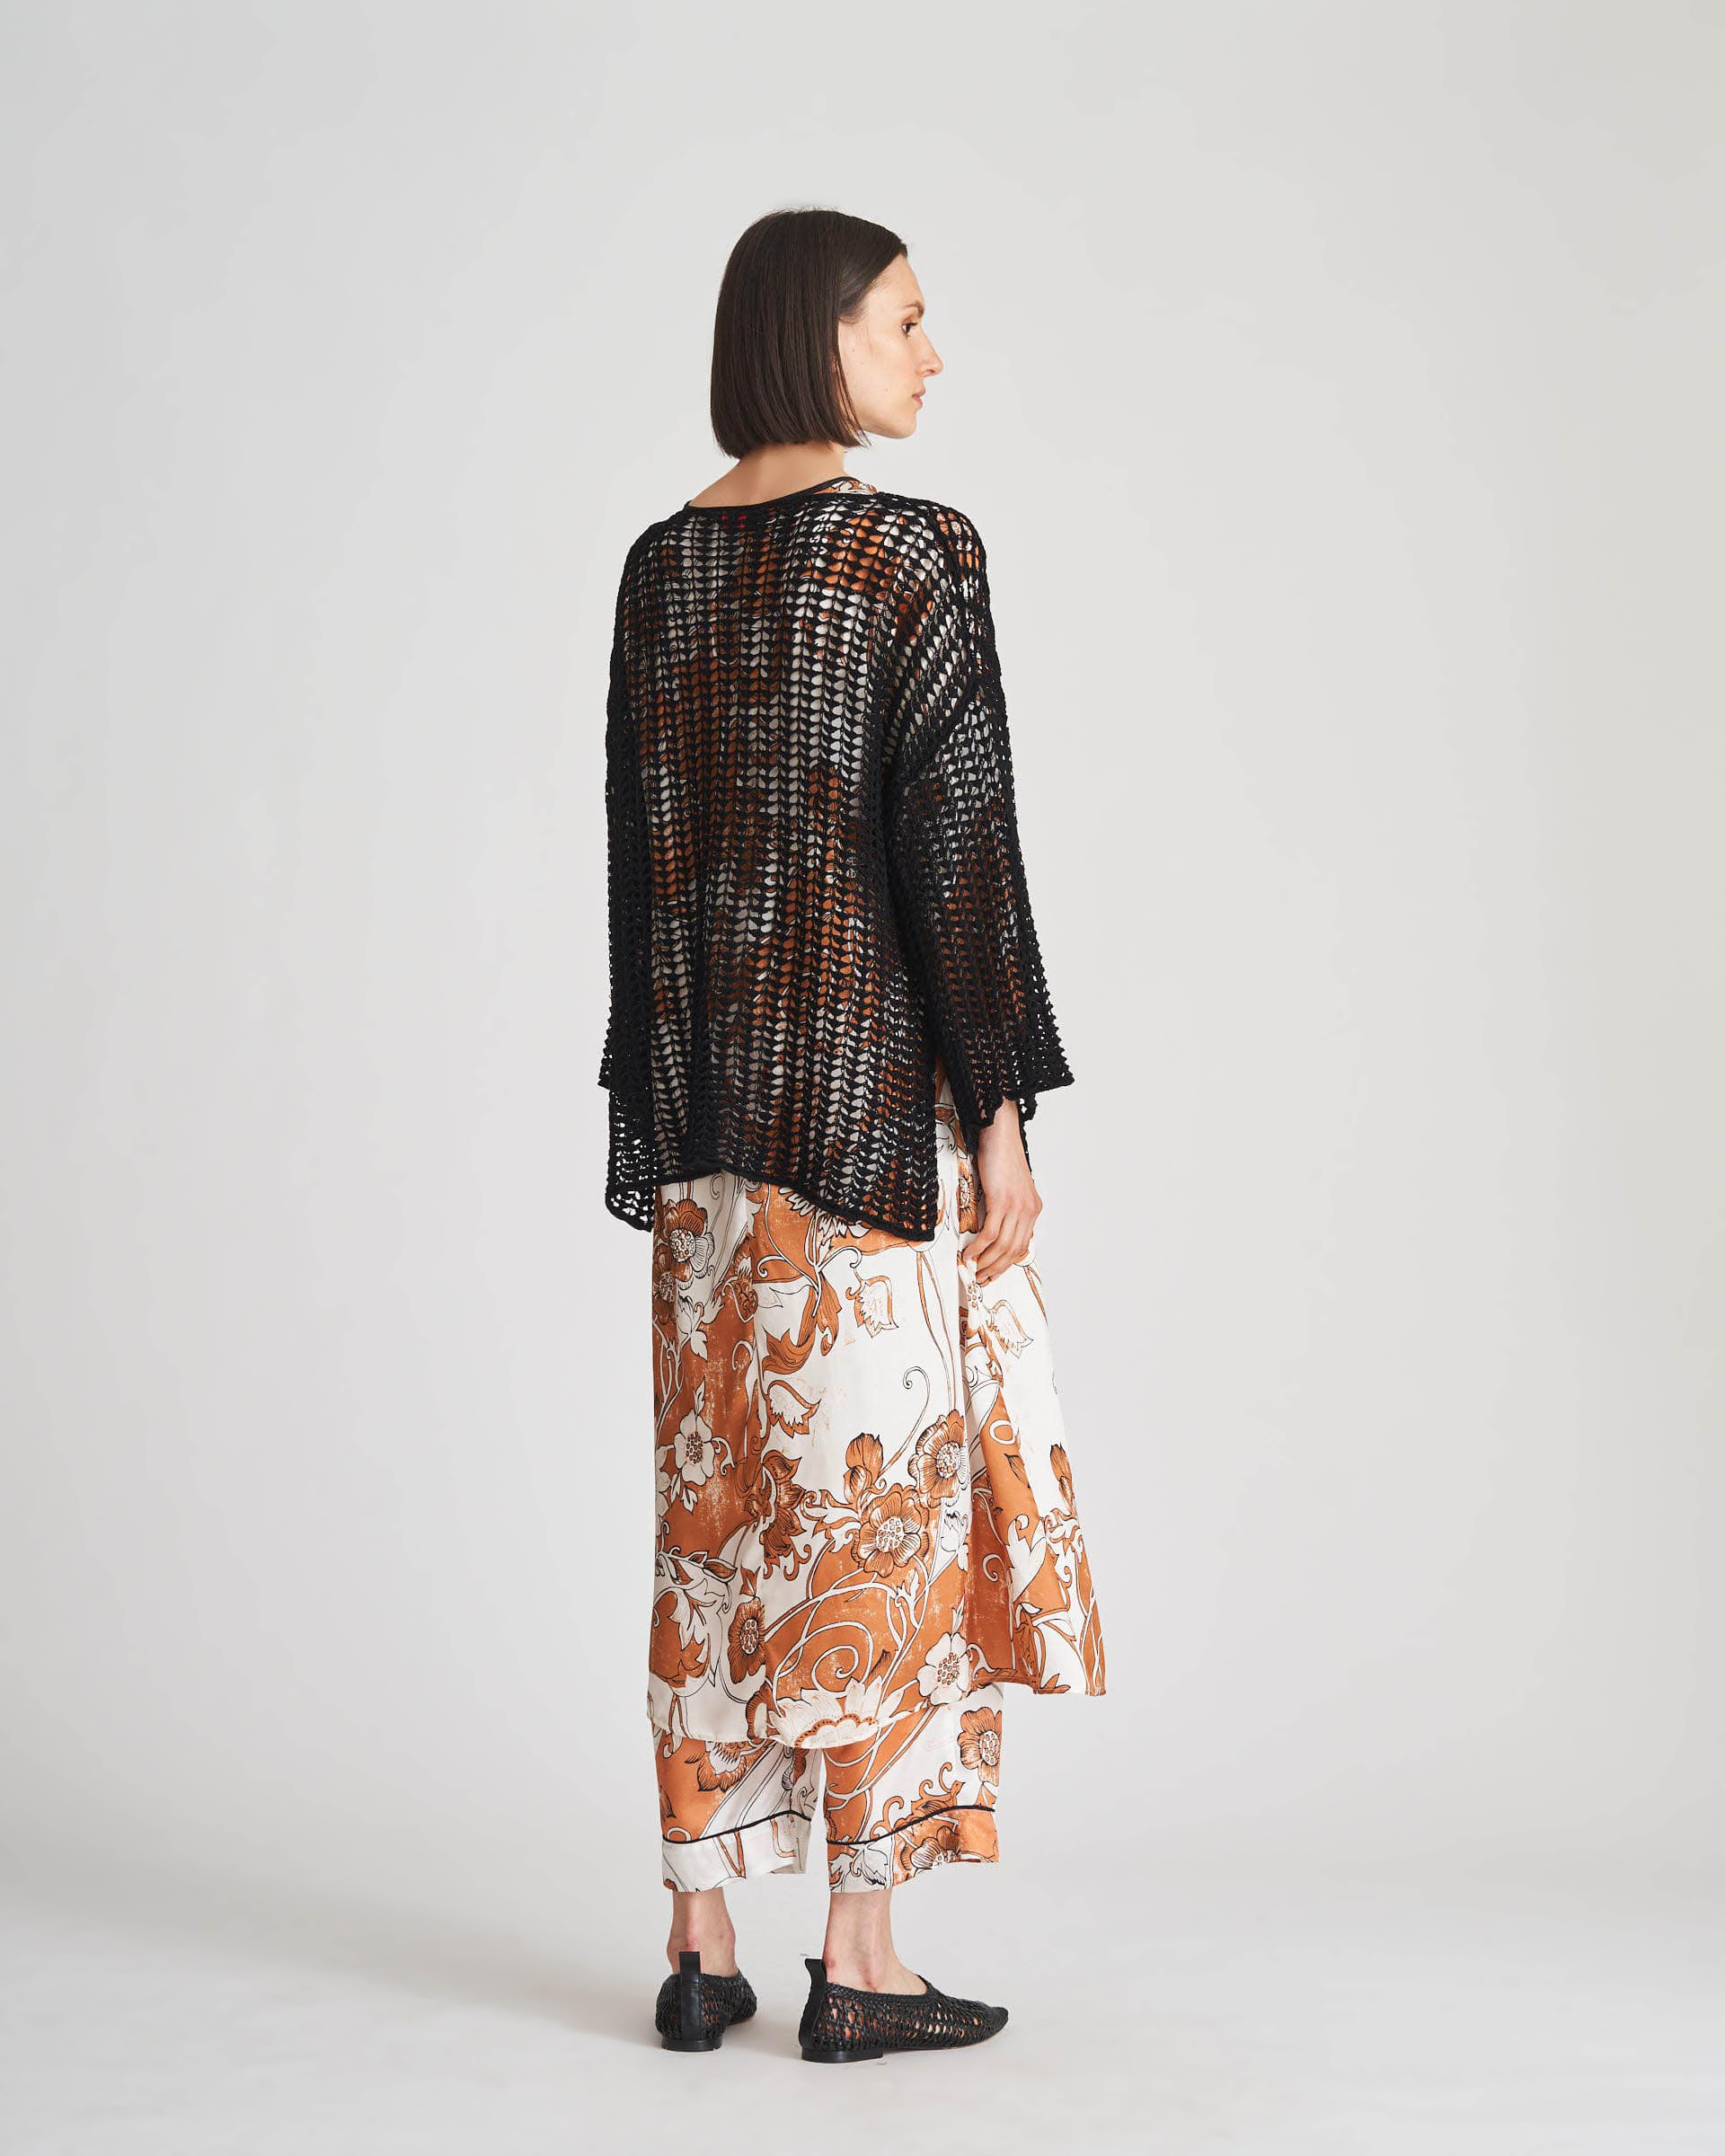 The Market Store | Over Boat Sweater With Large Openwork